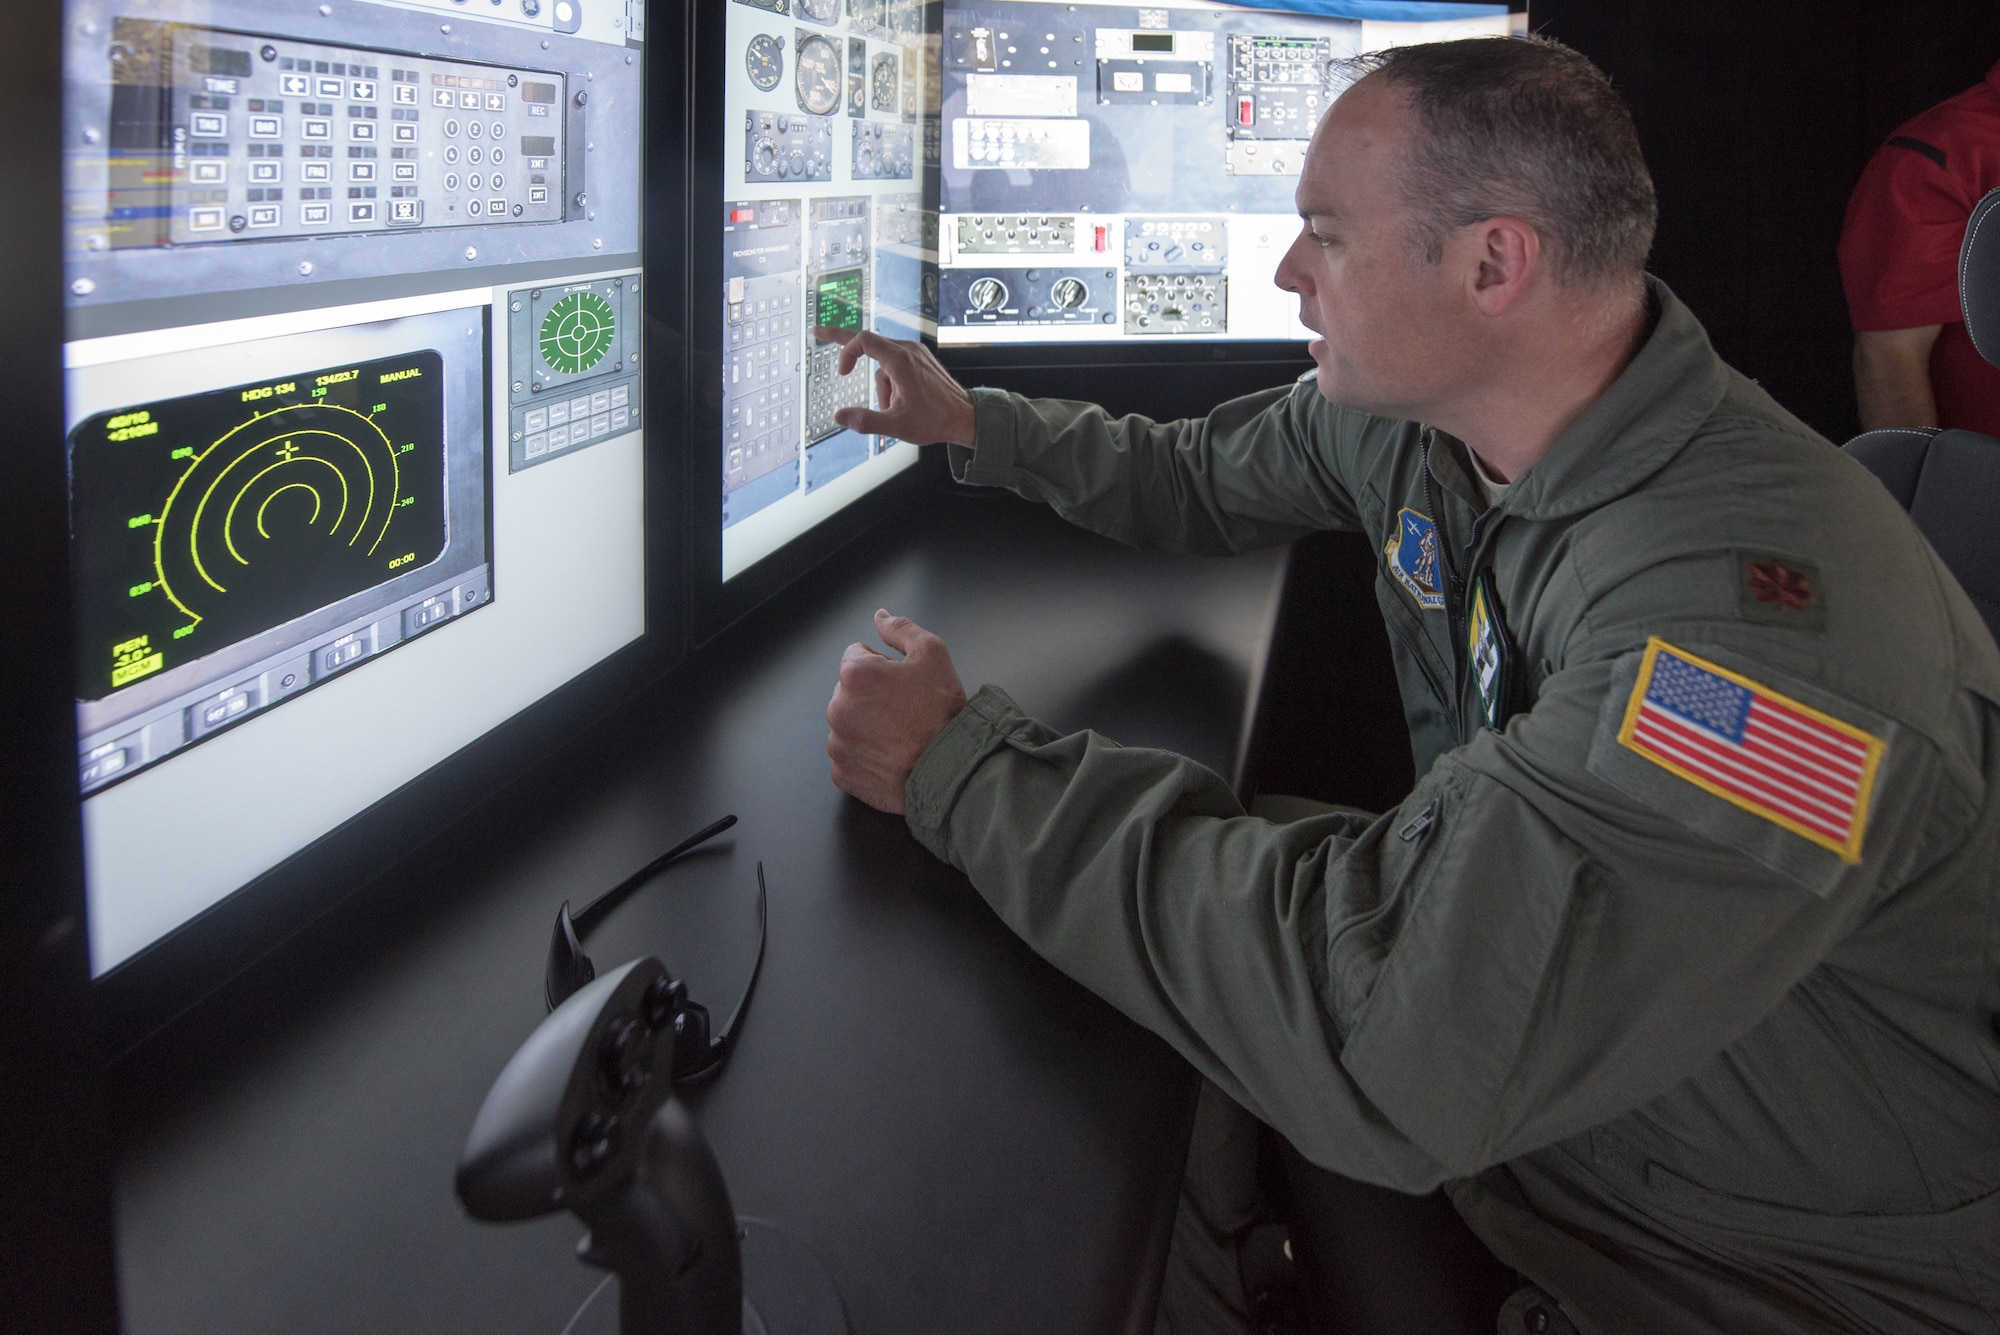 Maj. Bryan Keating, a navigator from the Kentucky Air National Guard’s 165th Airlift Squadron, uses touch panels on a C-130 simulator at the Kentucky Air National Guard Base in Louisville, Ky., Aug. 28, 2019. Known as the Multi-Mission Crew Trainer, the system helps prepare Airmen for handling in-flight emergencies. (U.S. Air National Guard photo by Phil Speck)